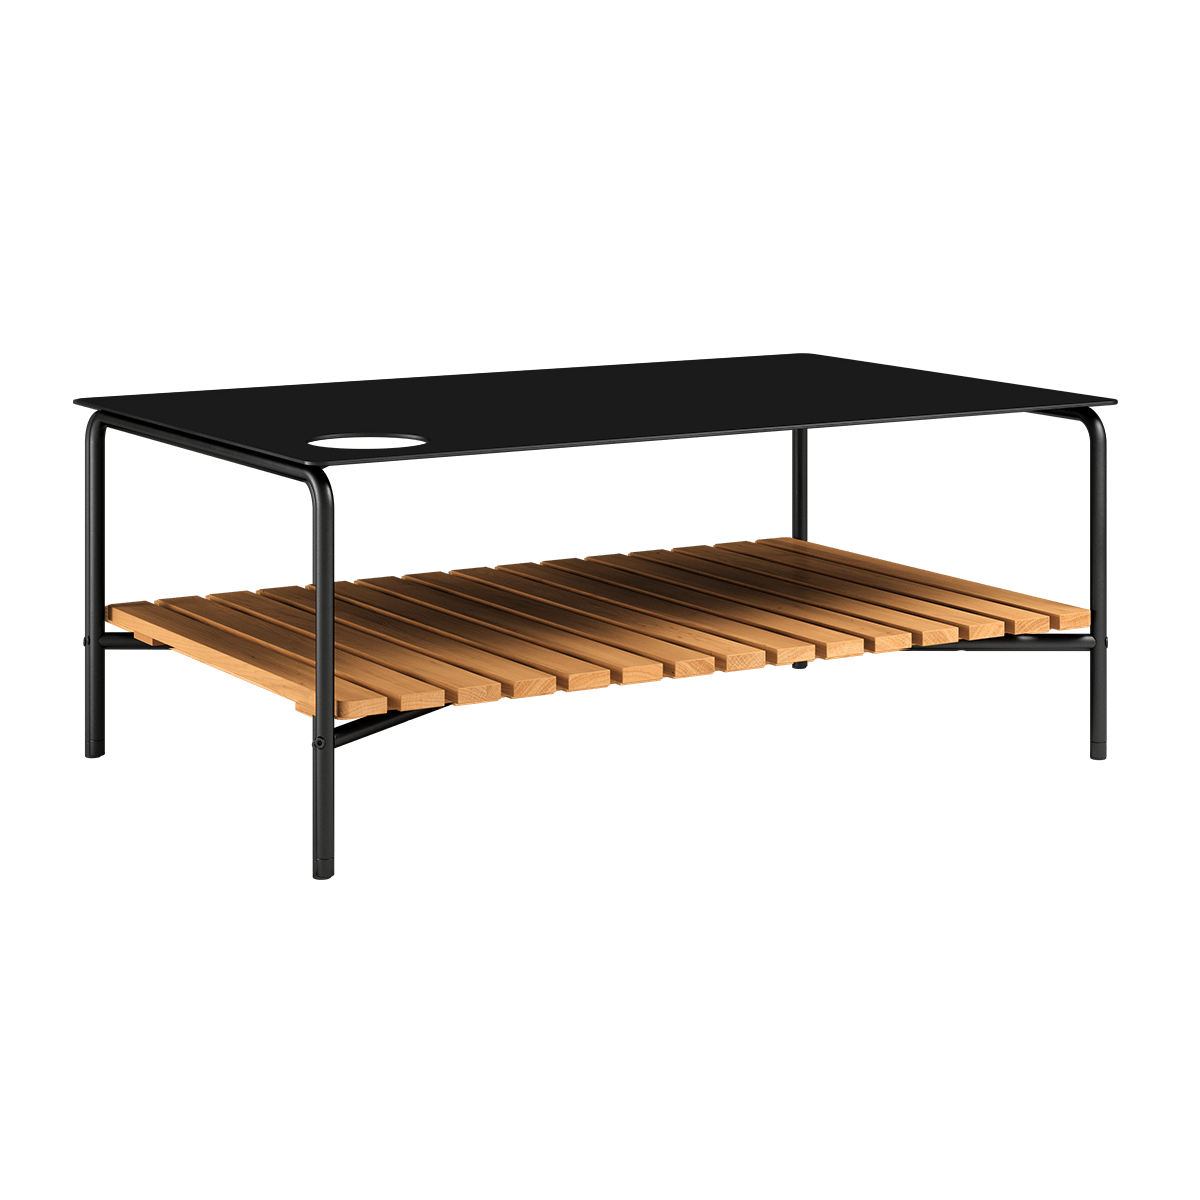 variant_8583513% | Patio Sofa Table - 113x70 - Med Accessory Fit | SACKit